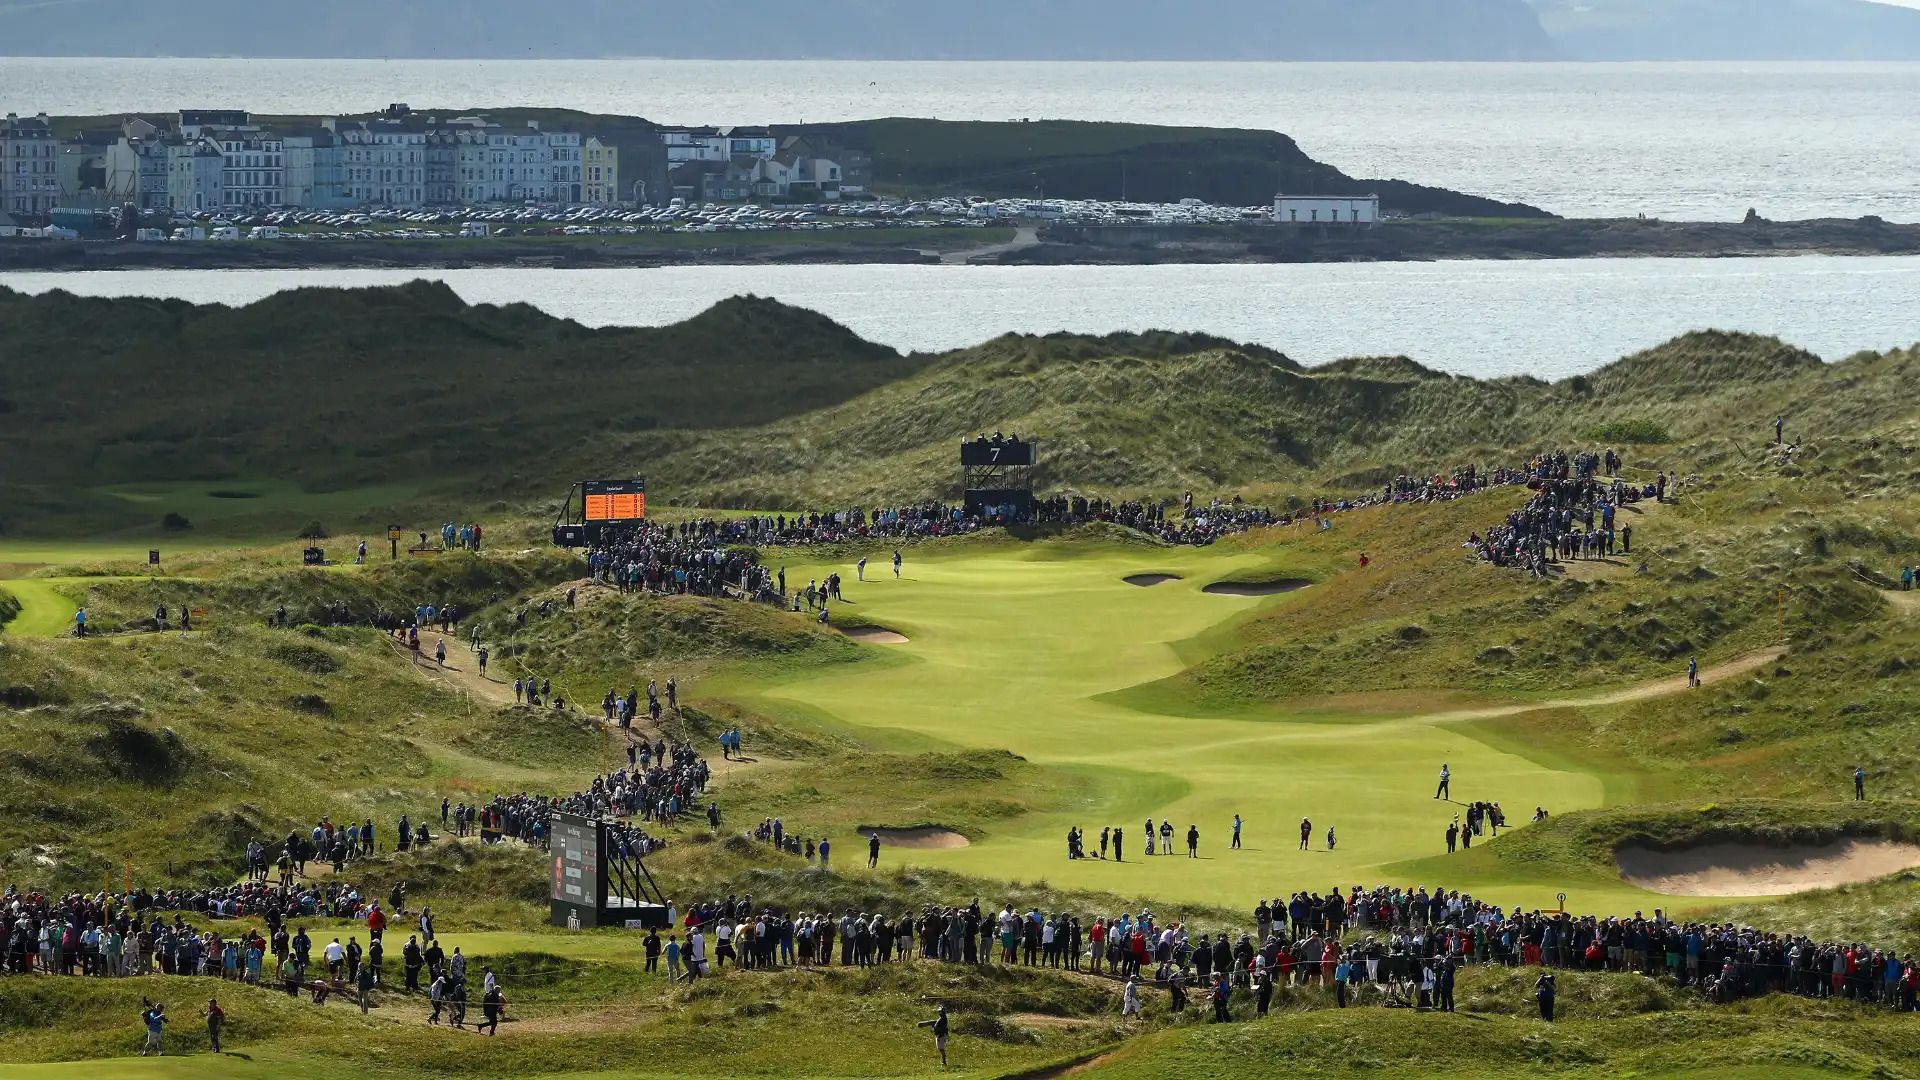 The 153rd Open Championship at Royal Portrush in 2025